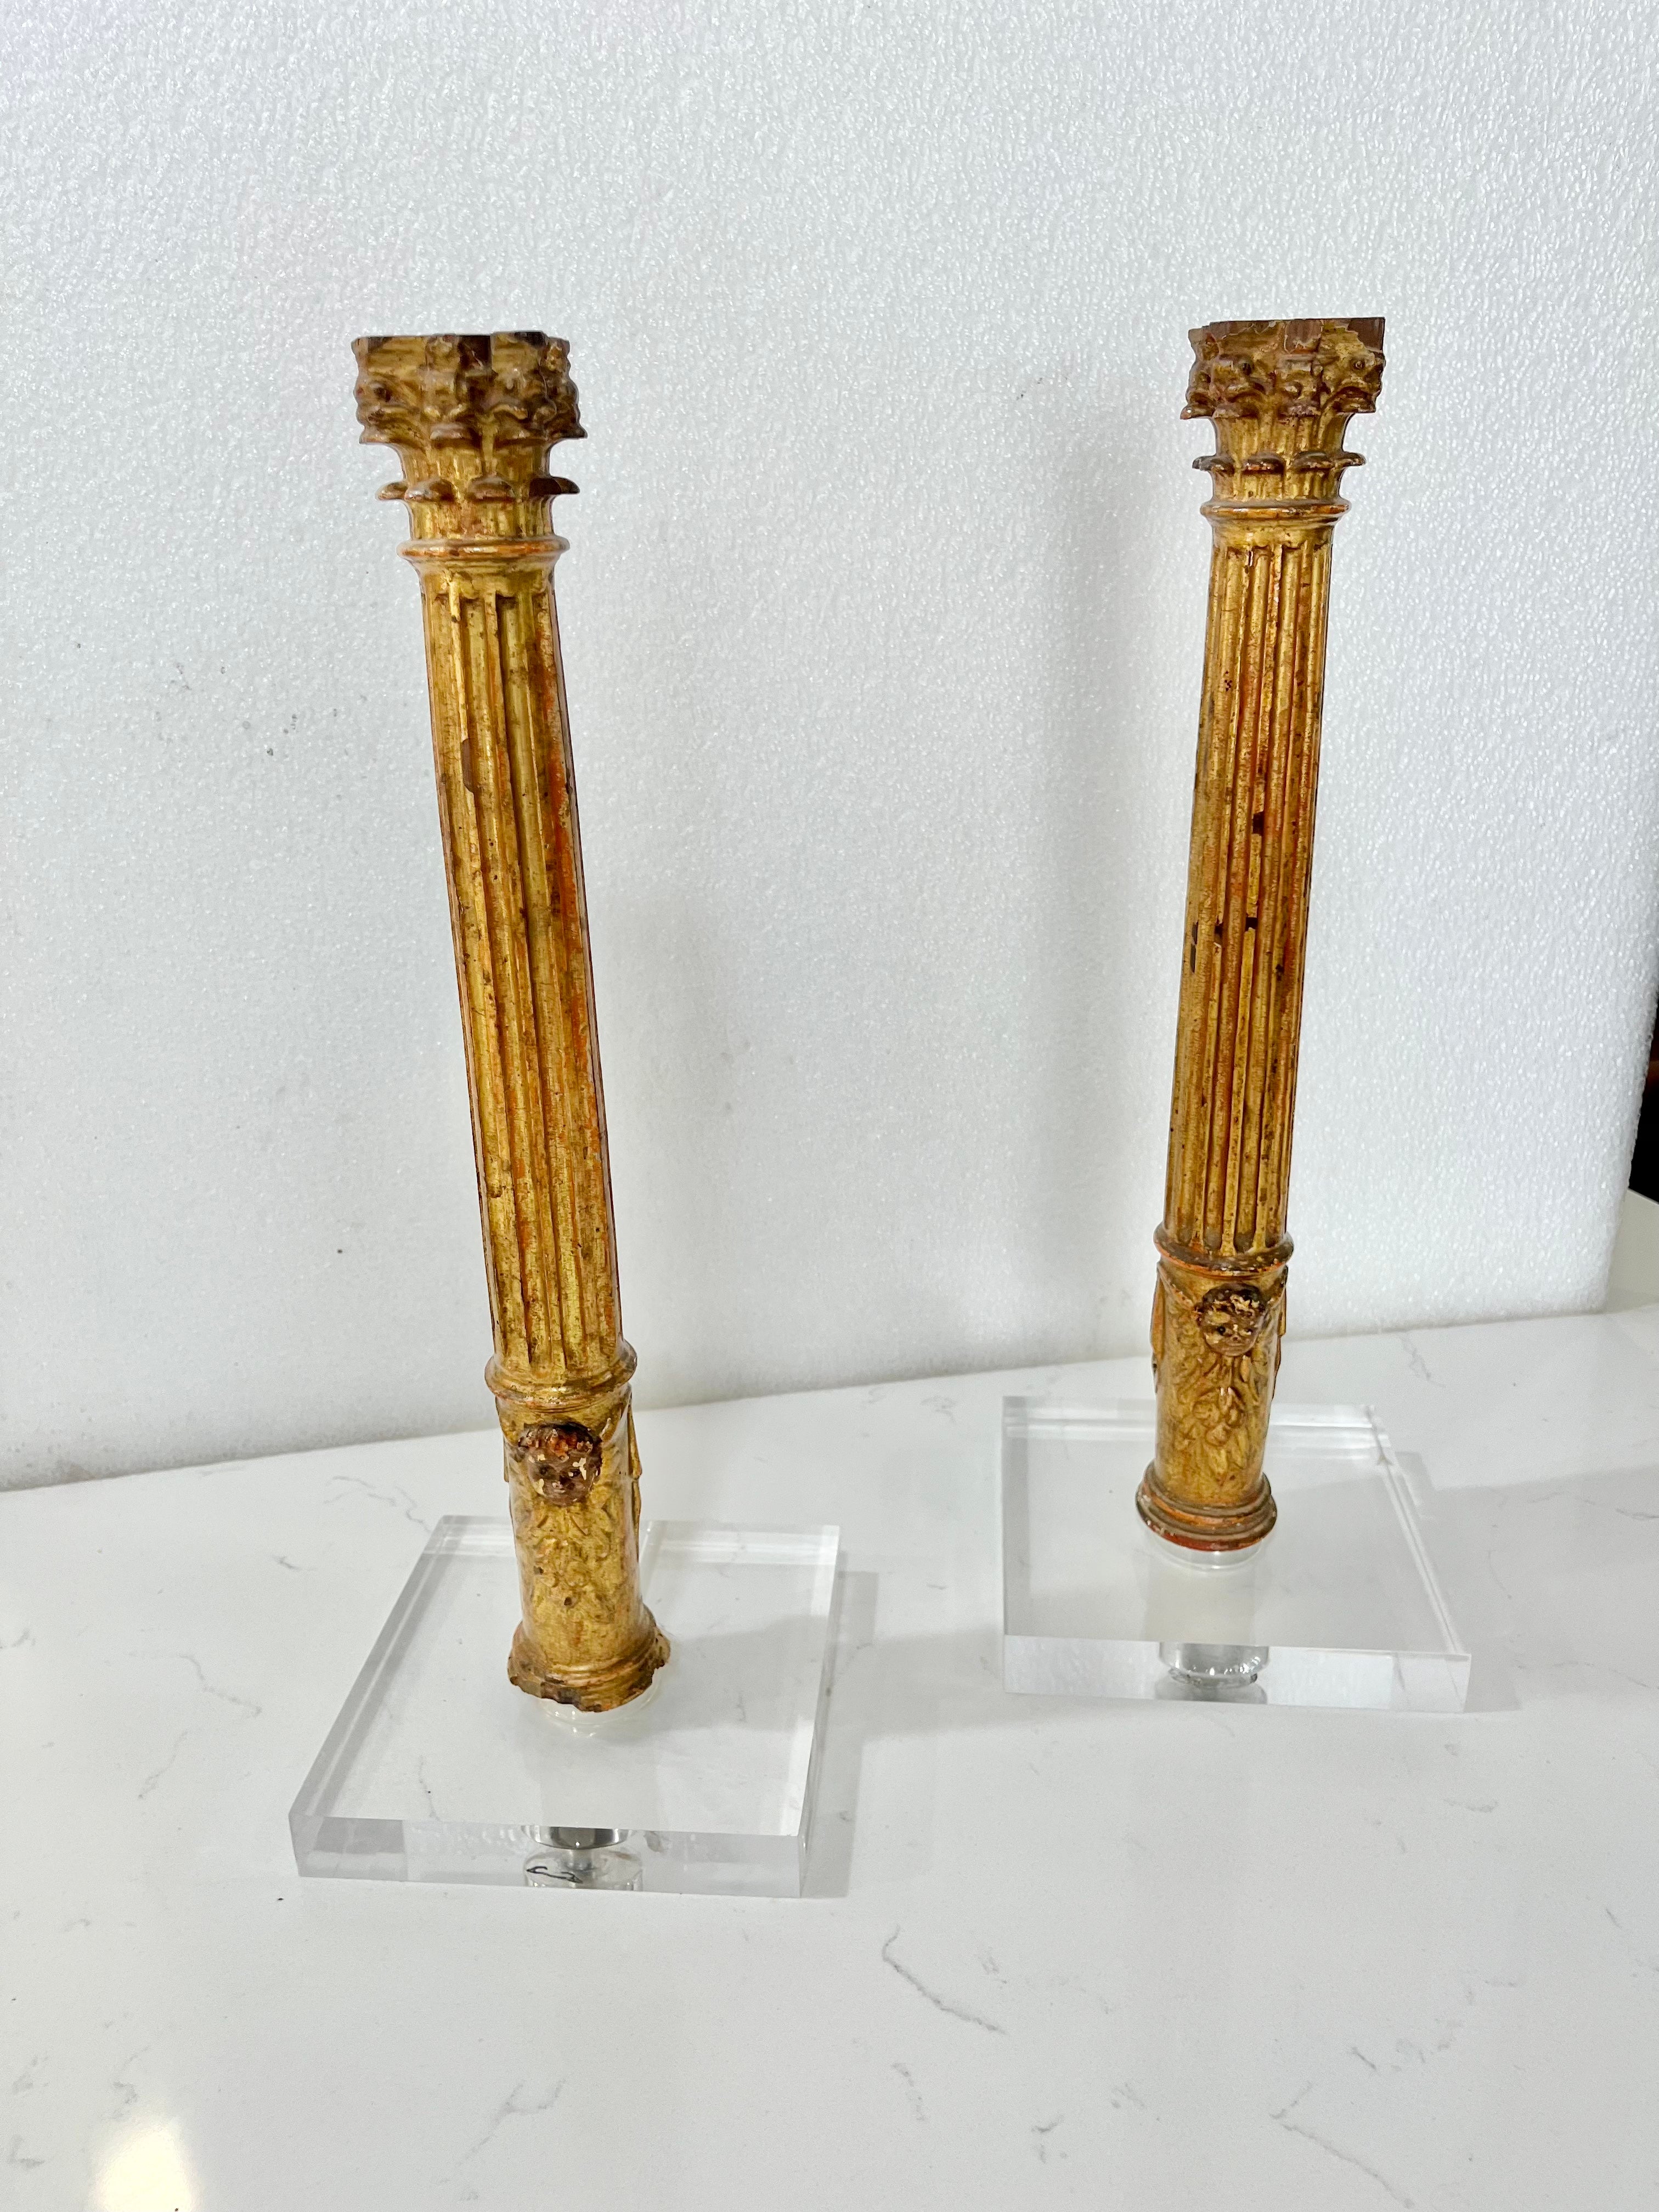 A nicely carved pair of 19th century Grand Tour period giltwood souvenirs of fluted columns with Corinthian capitals.Now mounted on contemporary acrylic bases with a back channel for lamp wiring if so desired .      

Presents very well and in